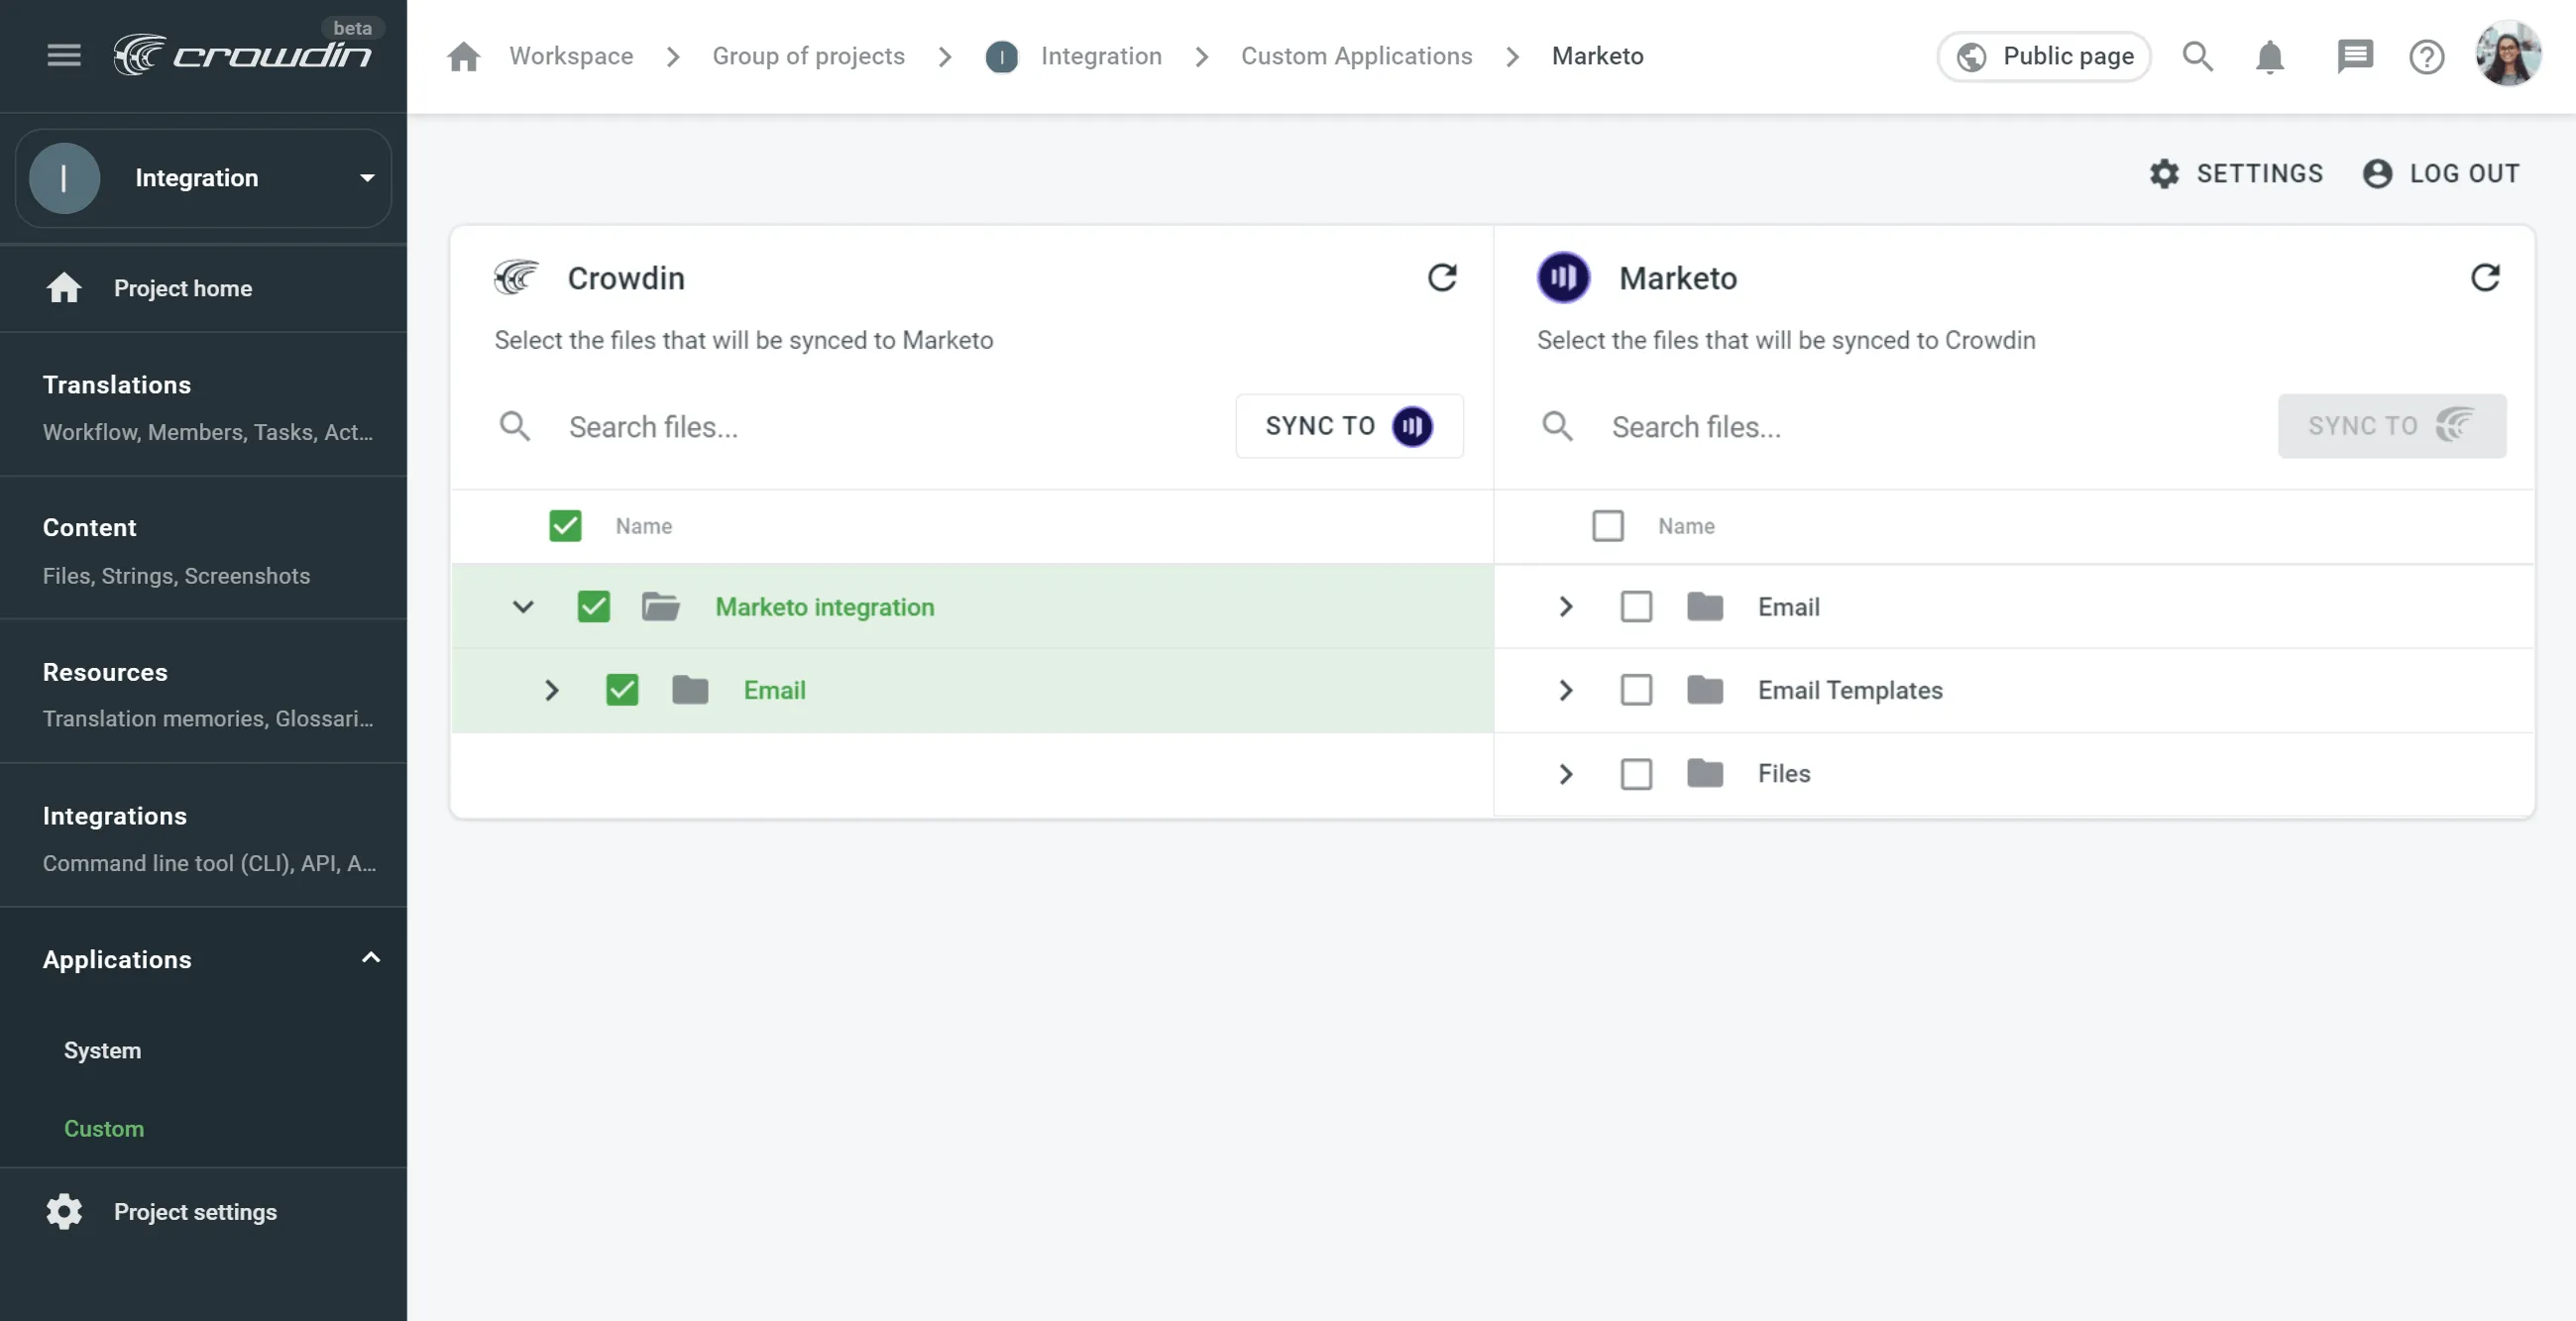 Sync content between Crowdin and Marketo